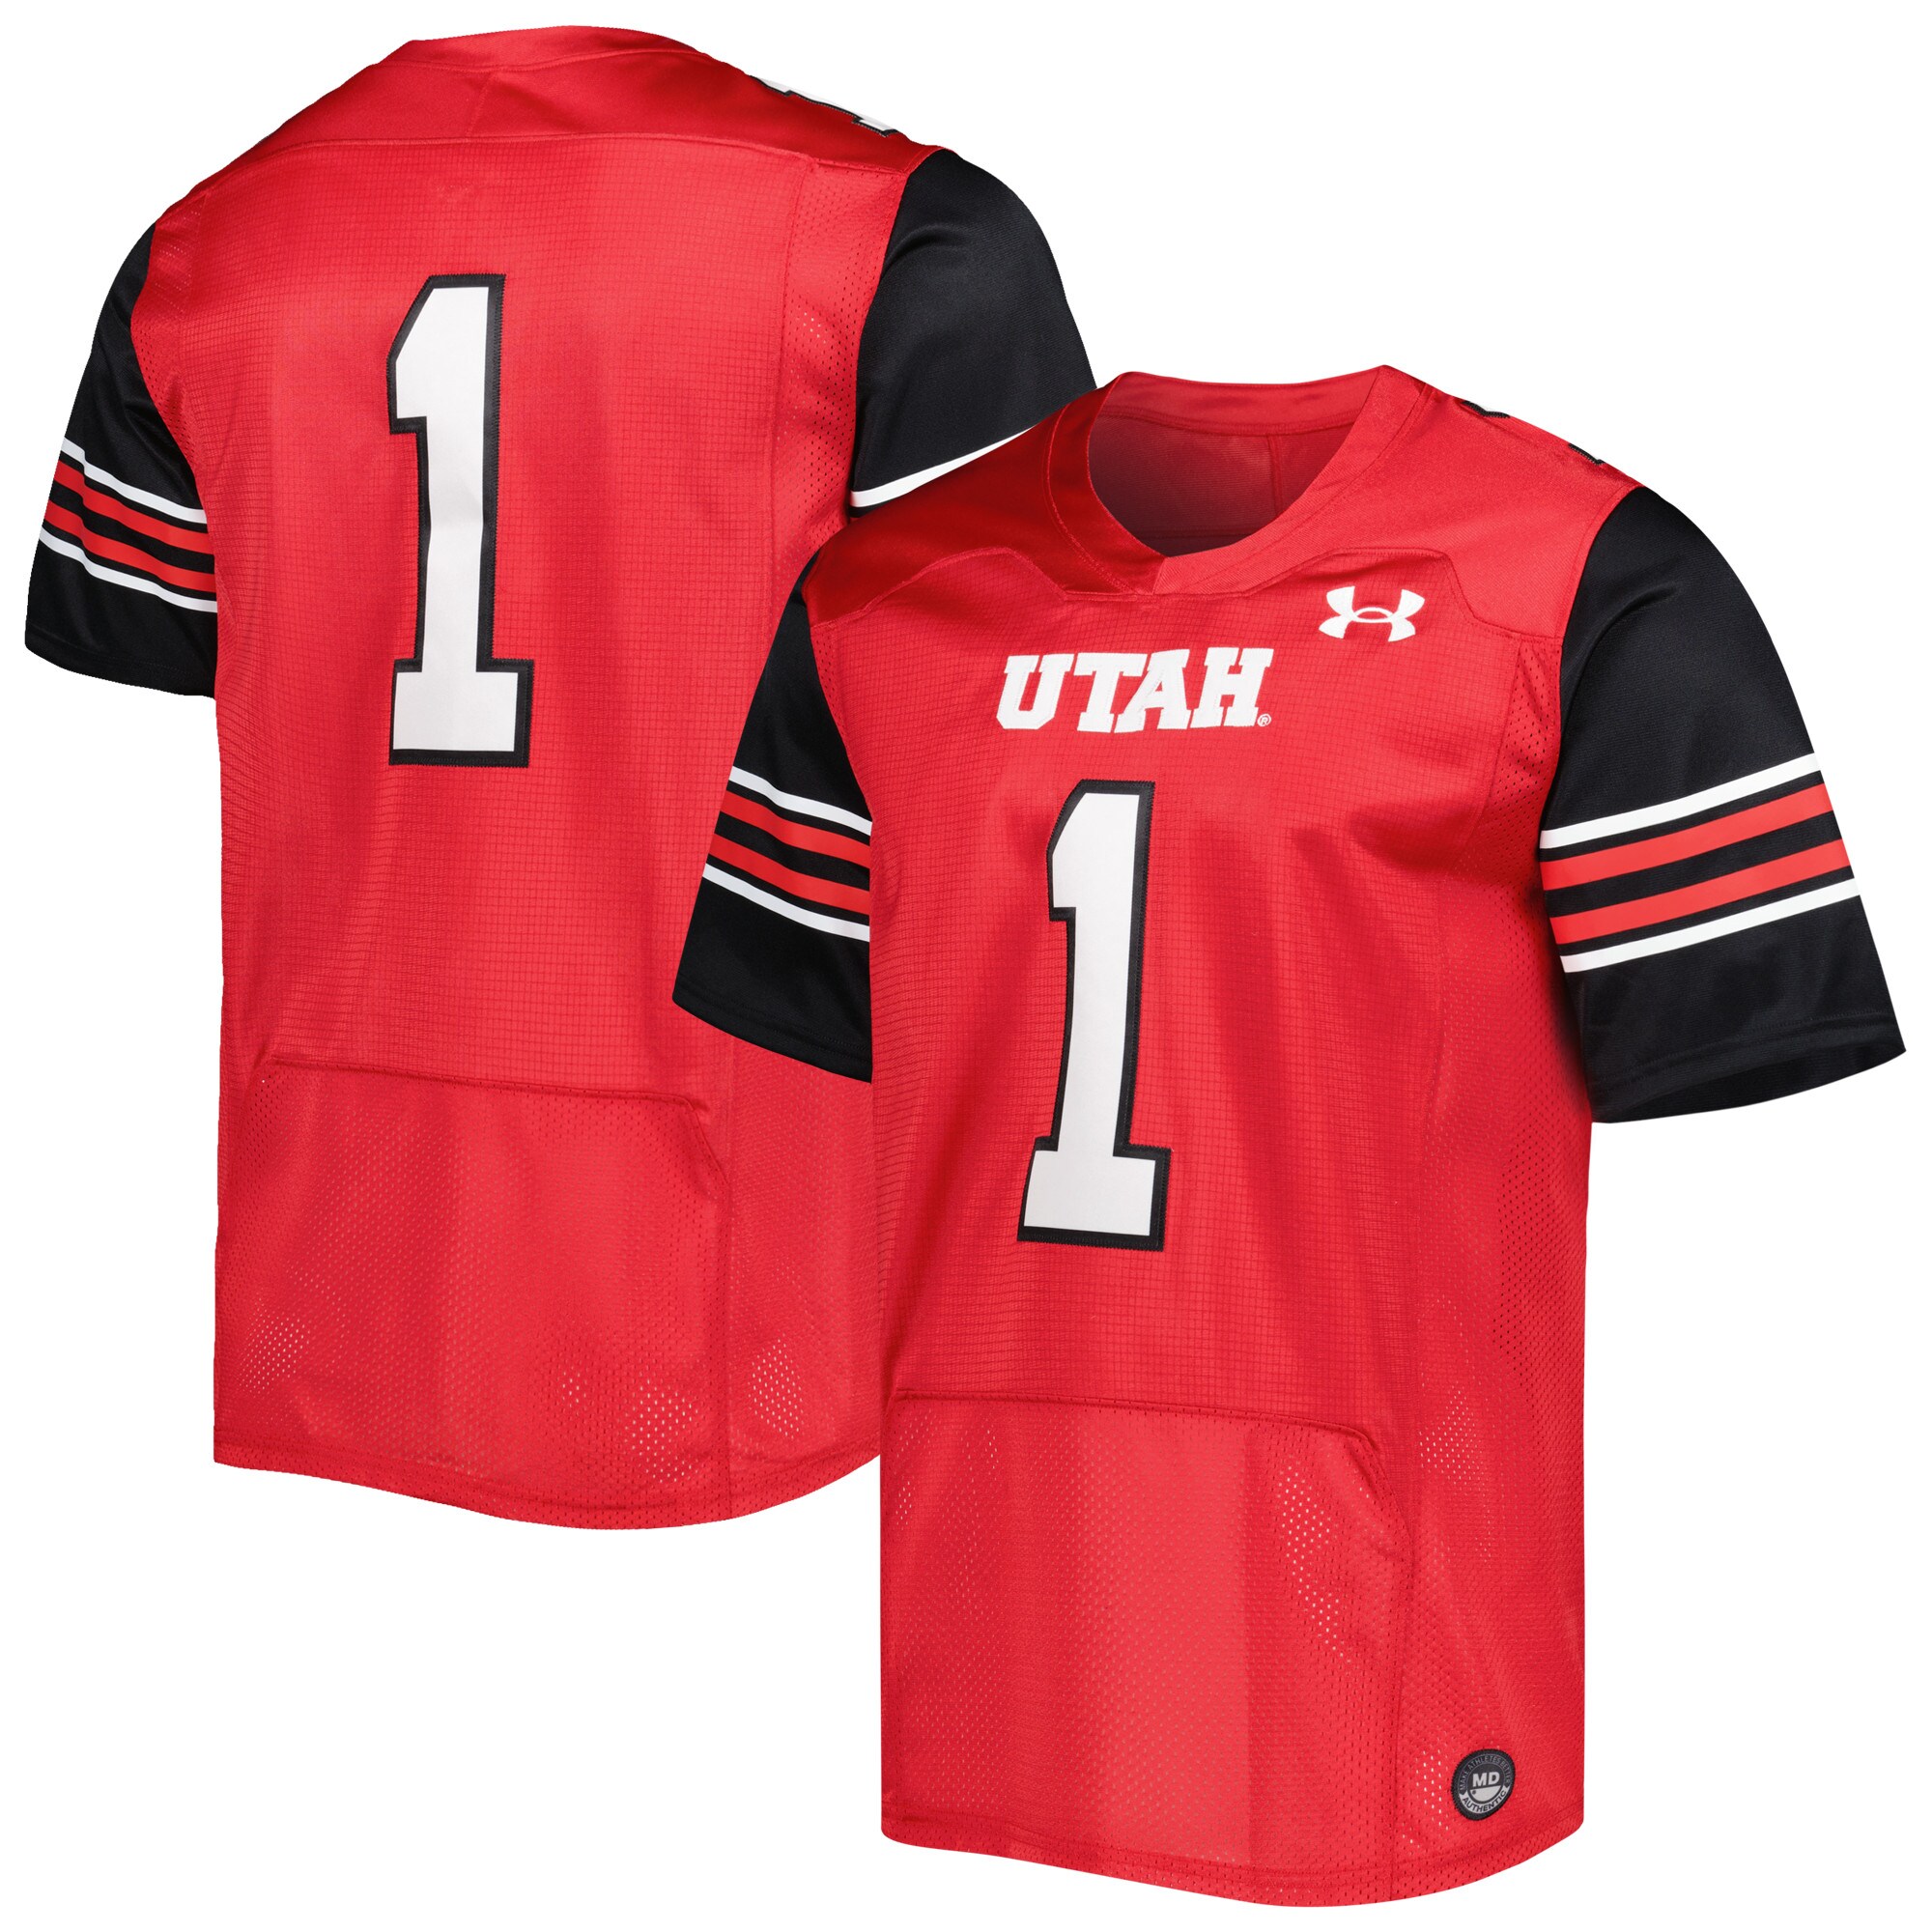 #1 Utah Utes Under Armour Premier Limited Jersey - Red For Youth Women Men